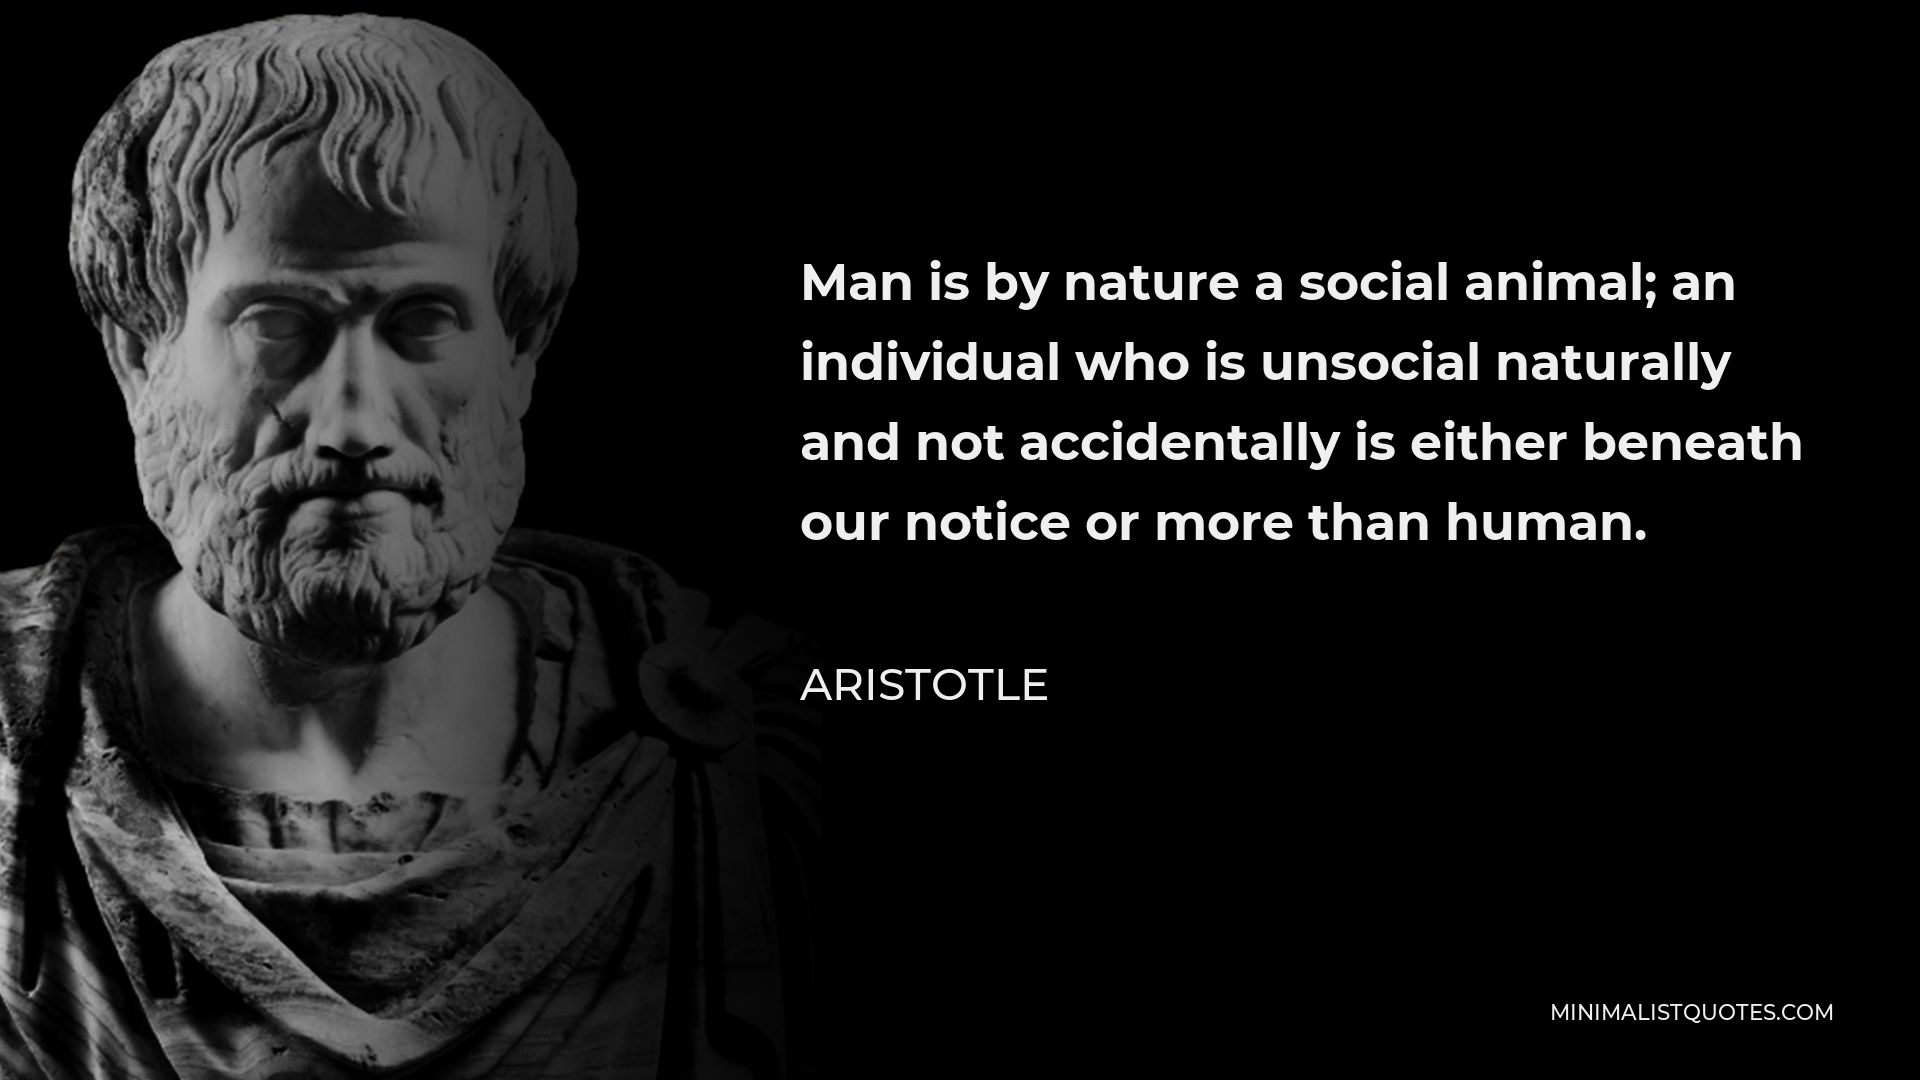 Aristotle Quote - Man is by nature a social animal; an individual who is unsocial naturally and not accidentally is either beneath our notice or more than human.